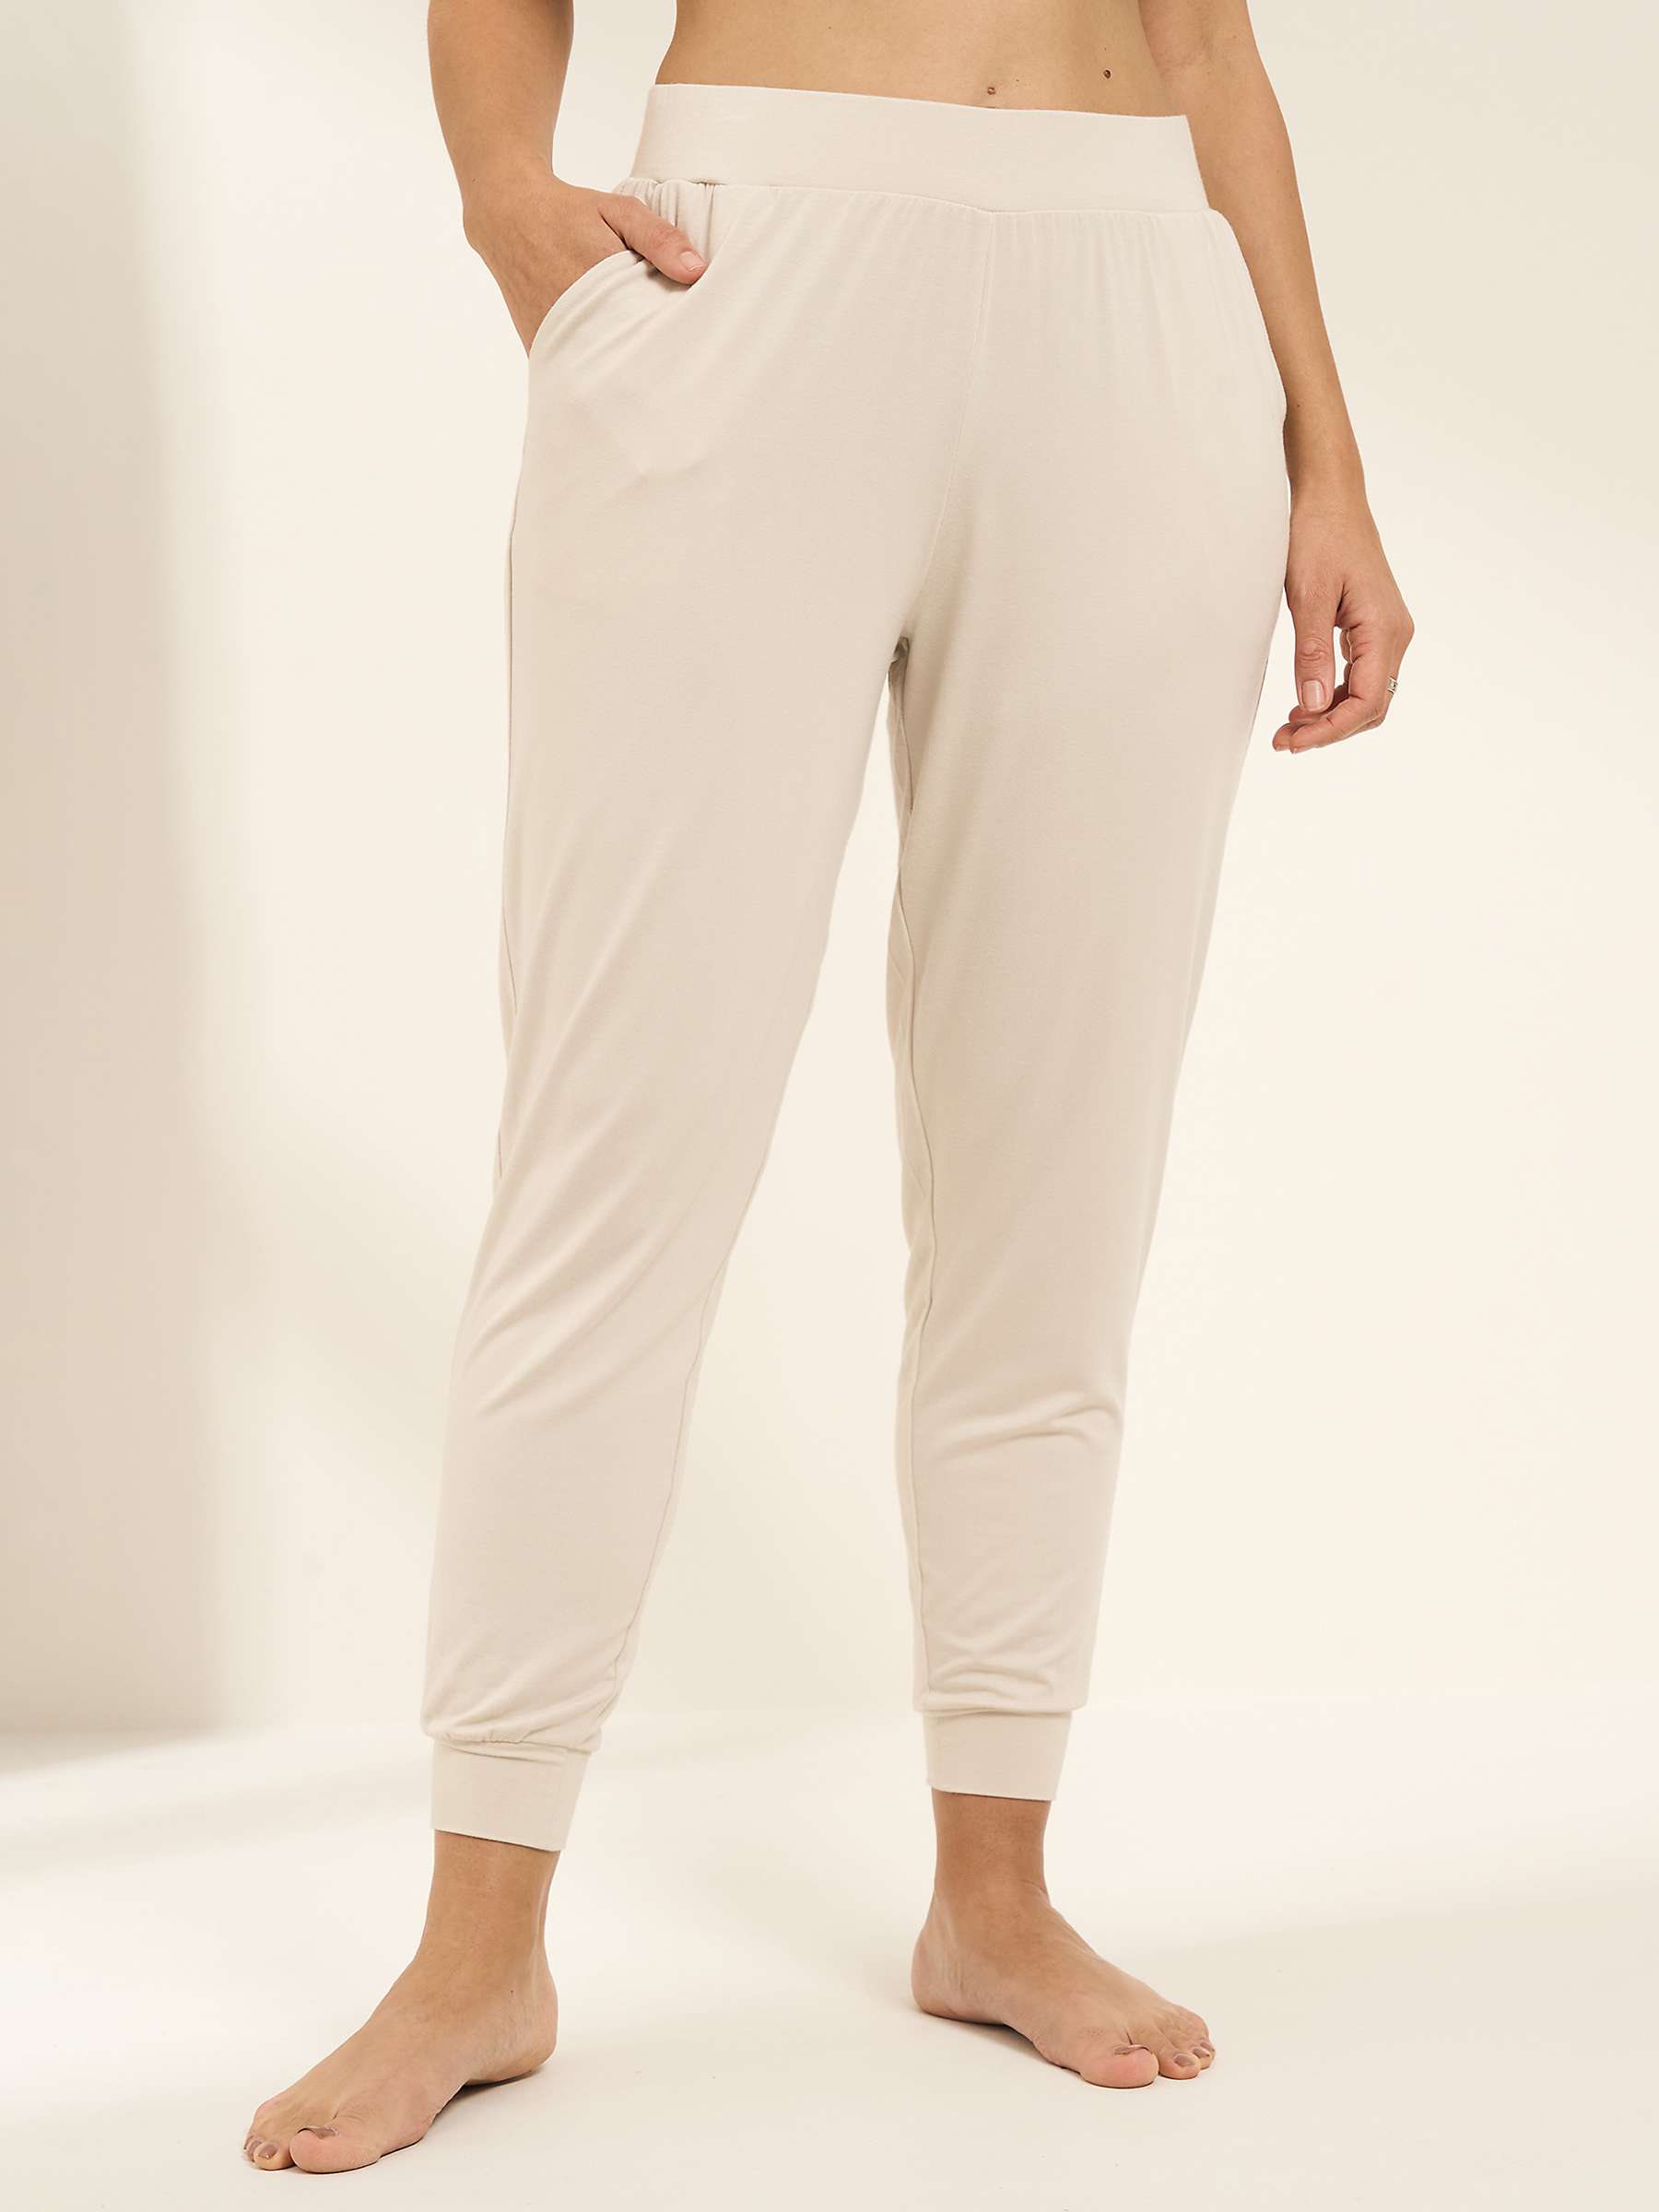 Buy Truly Hareem Joggers Online at johnlewis.com